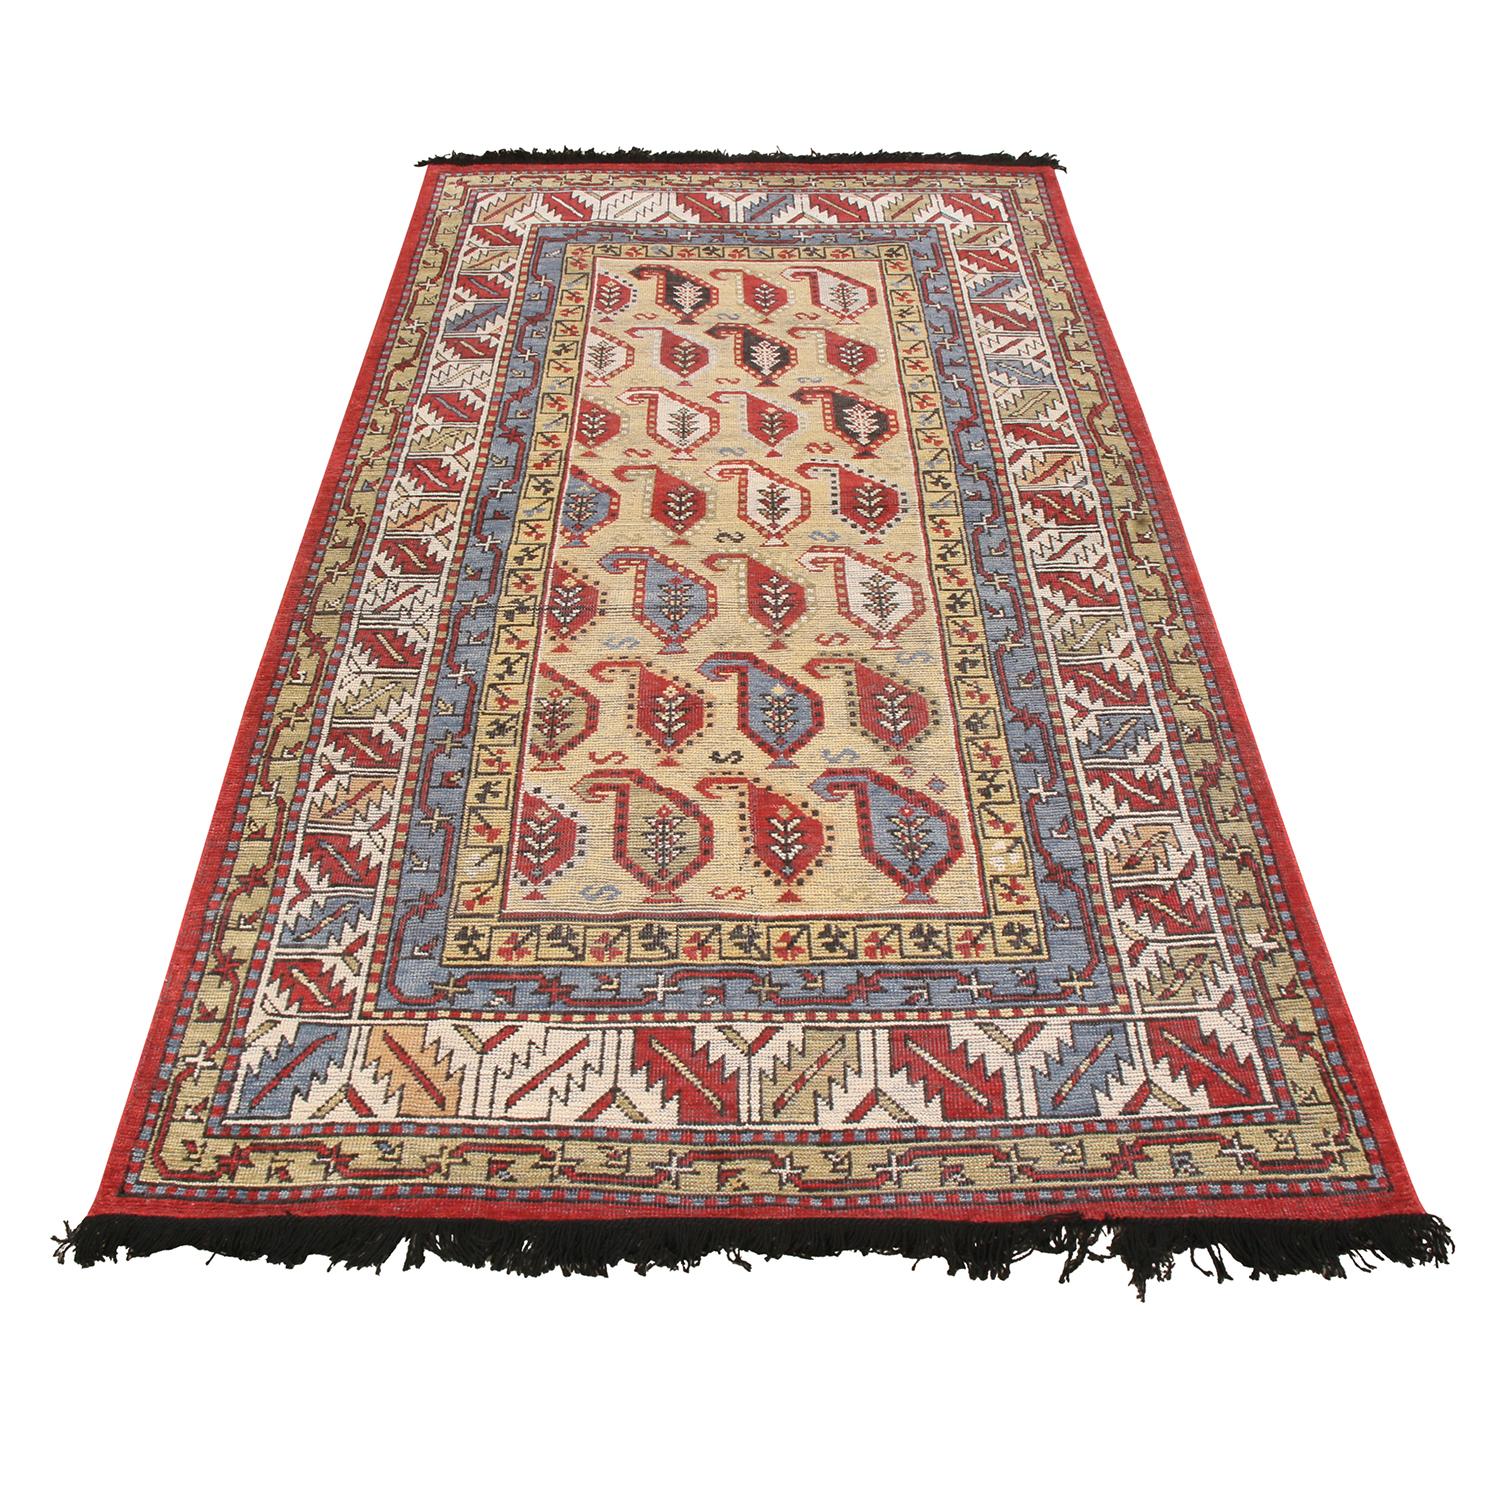 Originating from India, this hand knotted wool rug belongs to Rug & Kilim’s premier Burano collection, celebrating inspirations in its field design from the boteh pattern, a widely believed symbol of beauty, creation, and many themes varying from